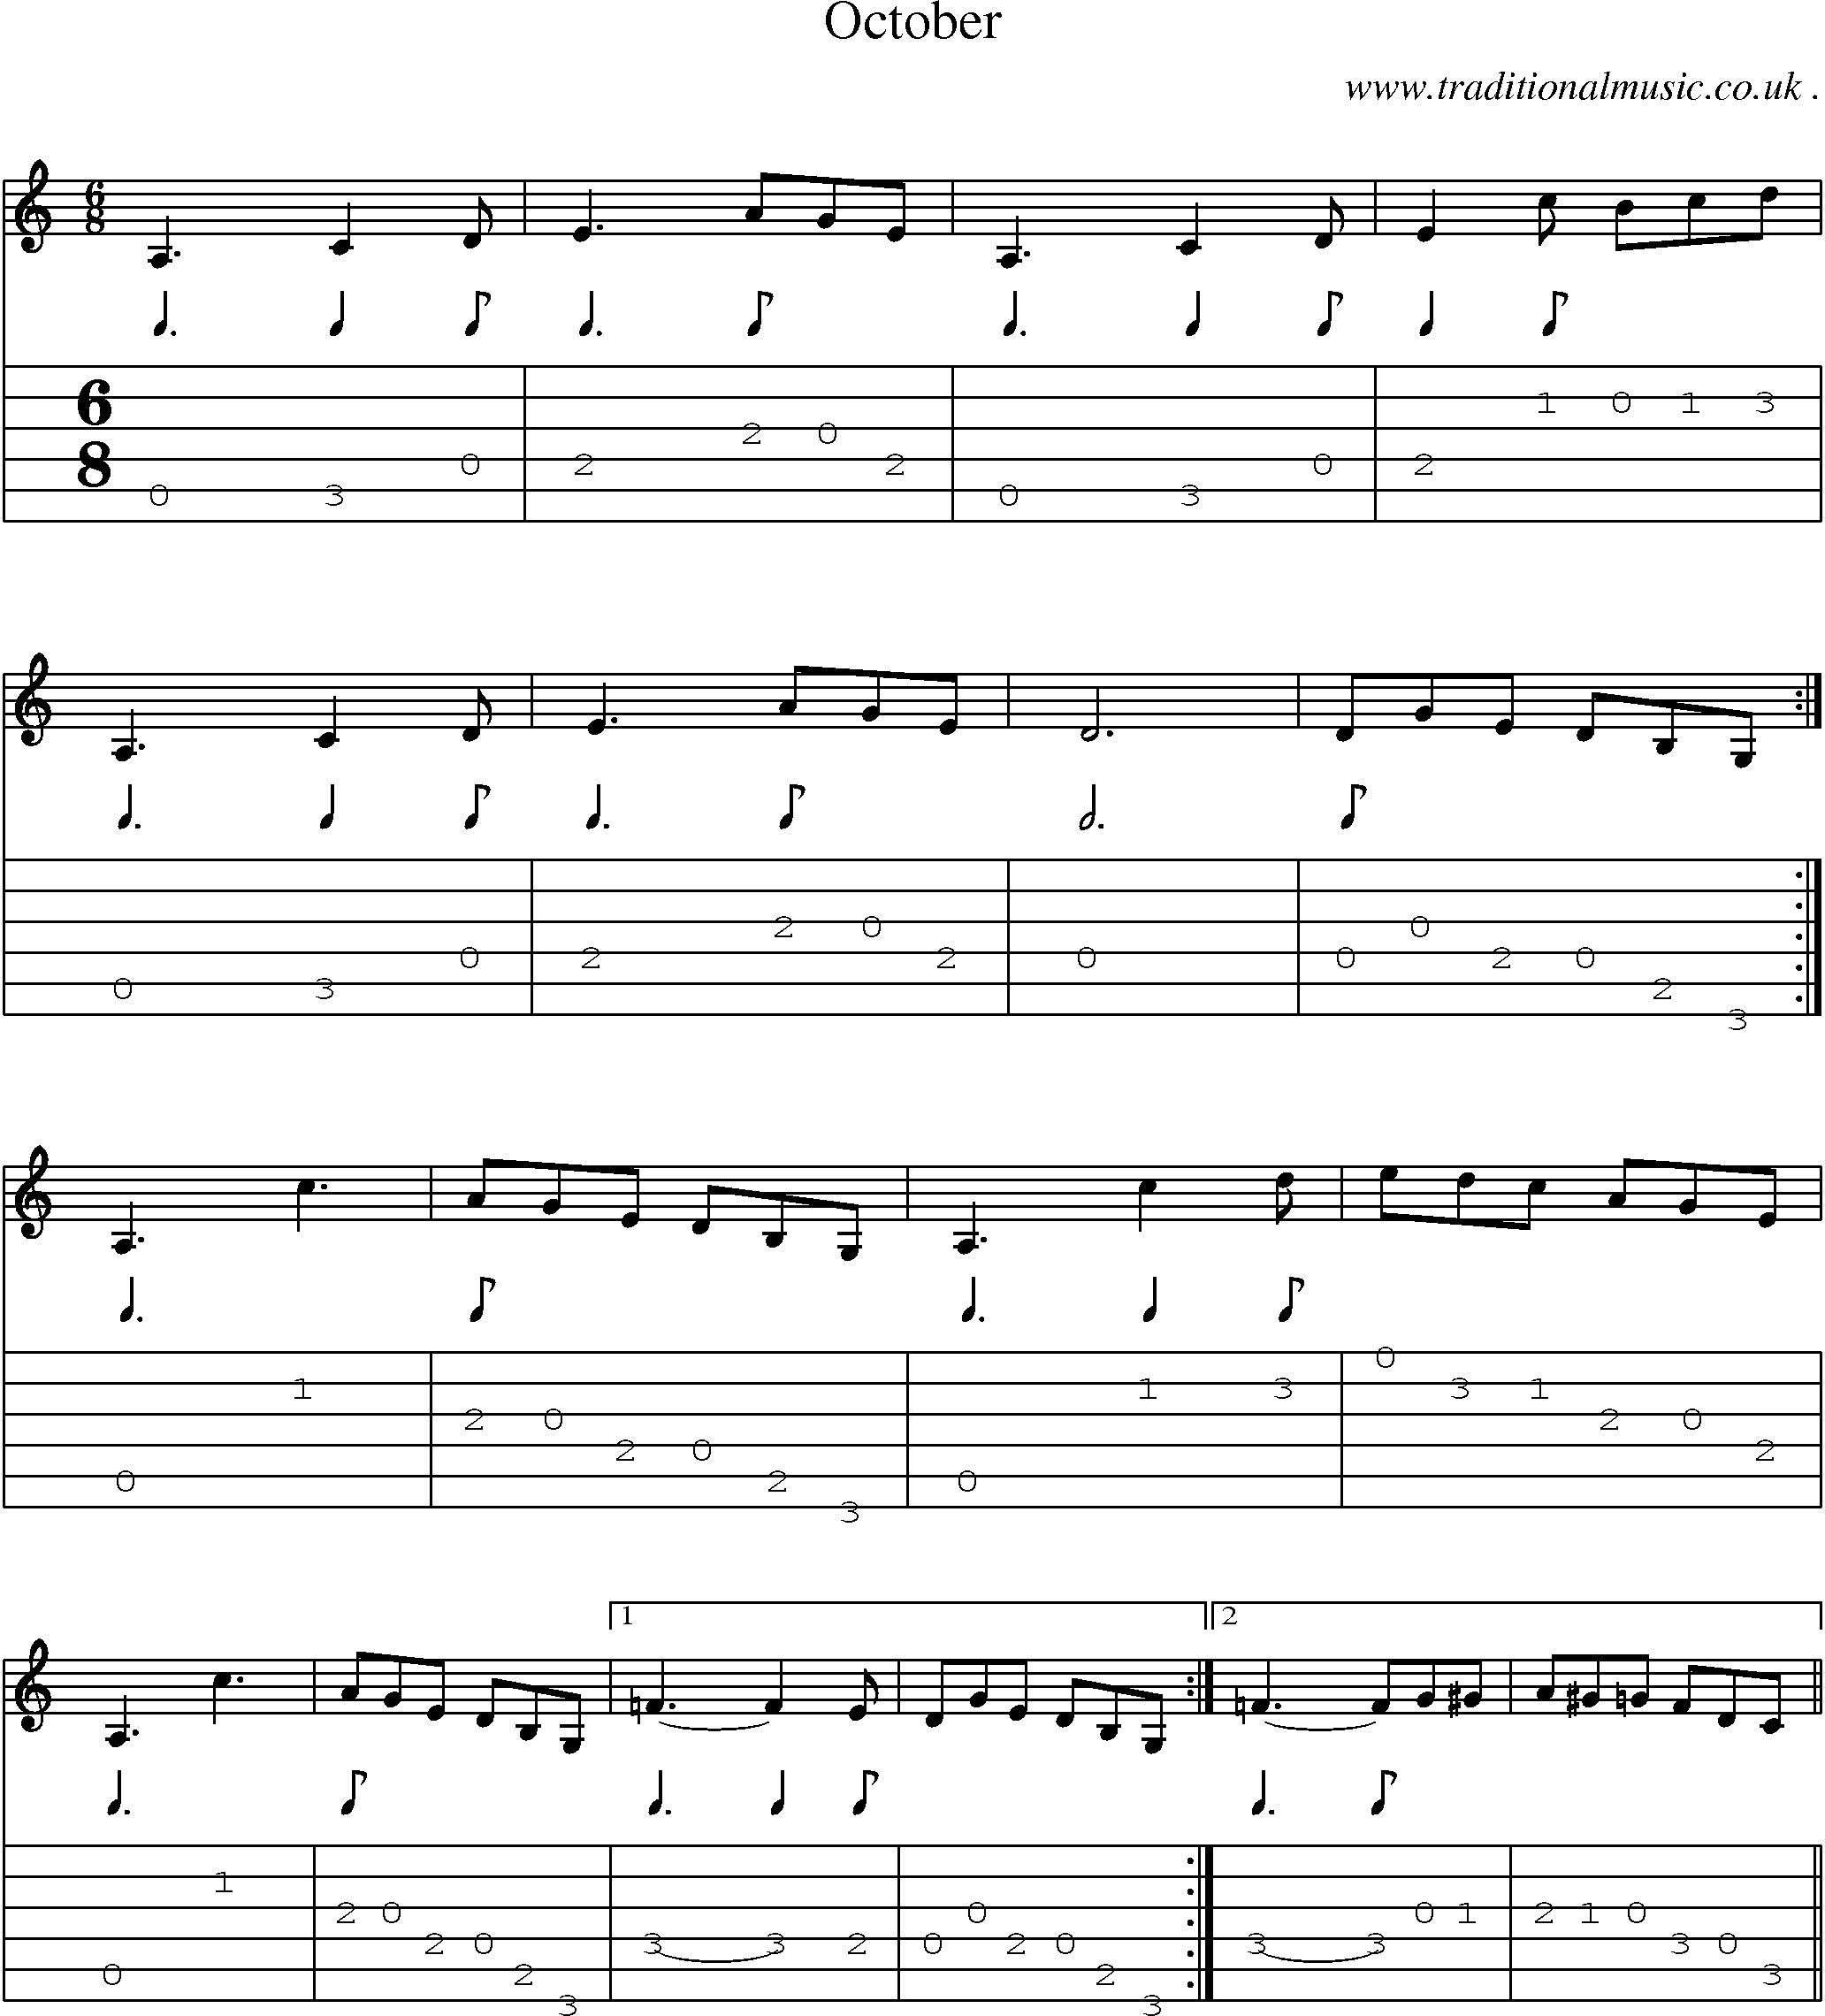 Sheet-Music and Guitar Tabs for October